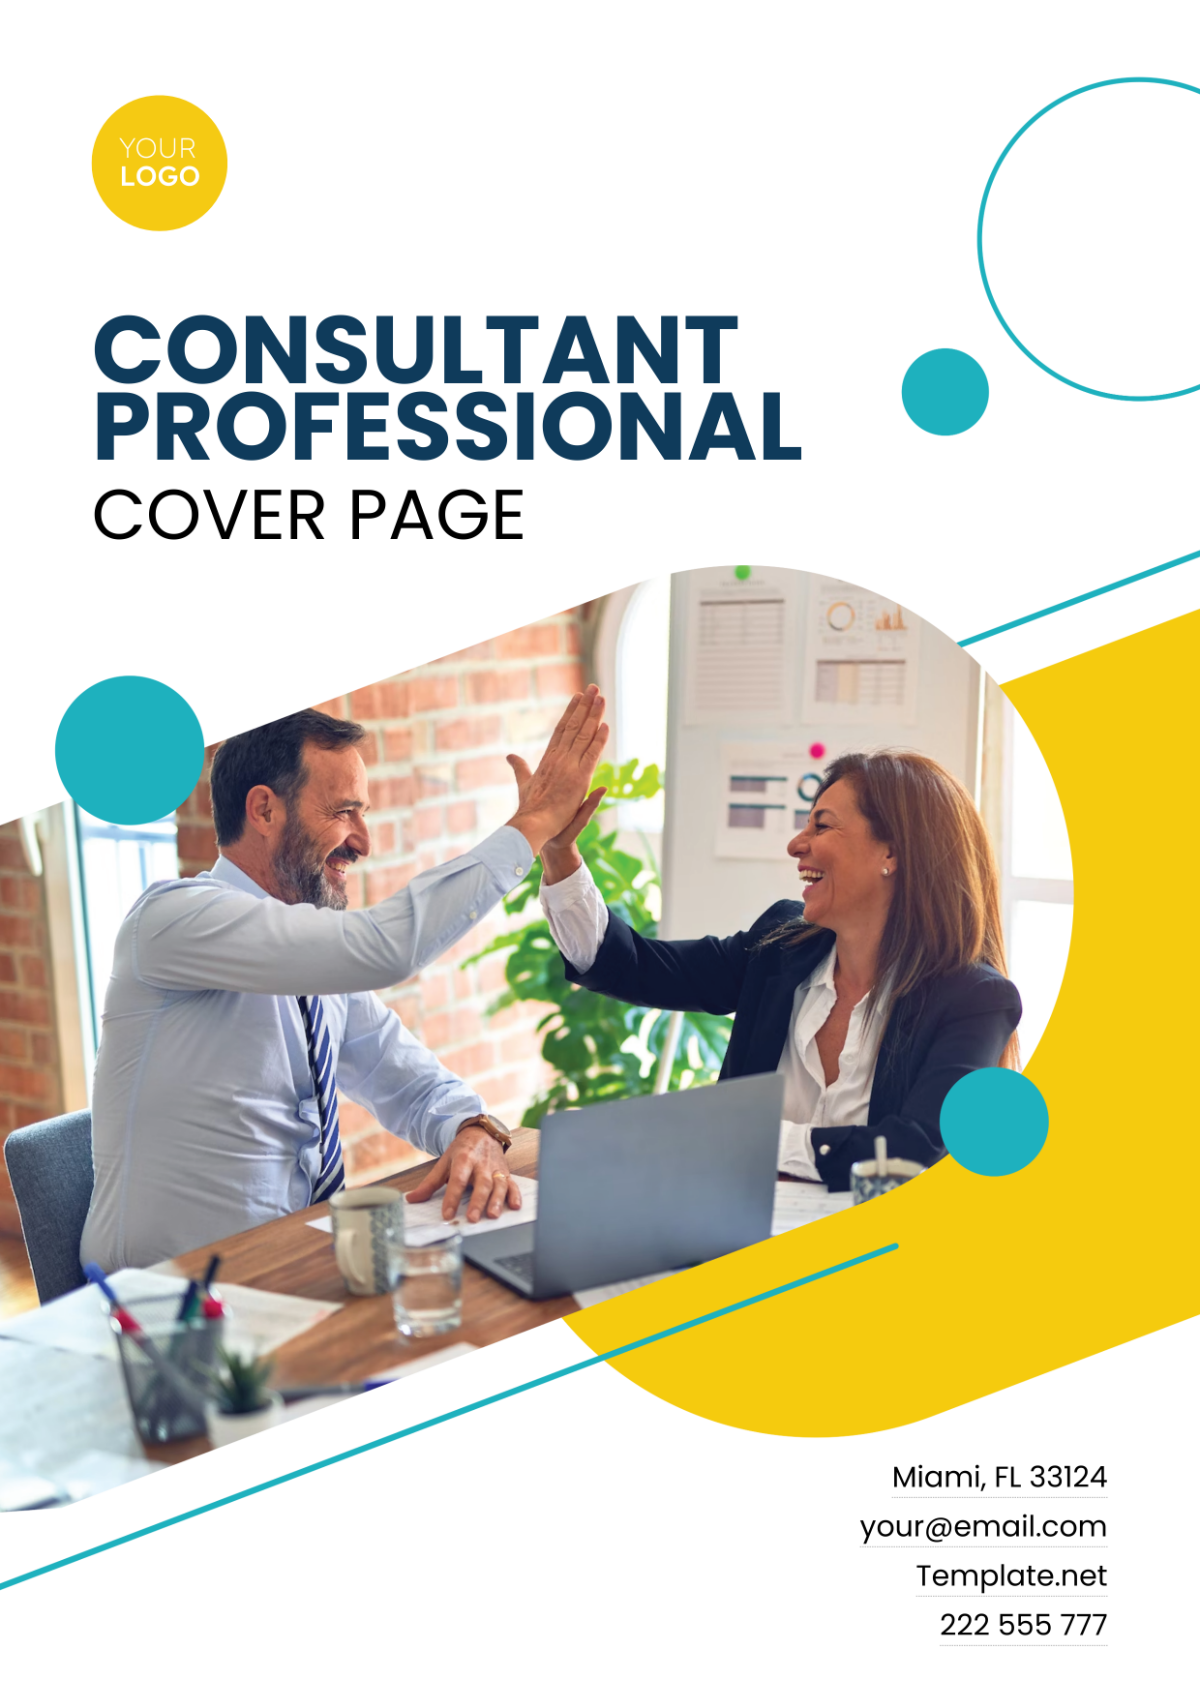 Consultant Professional Cover Page Template